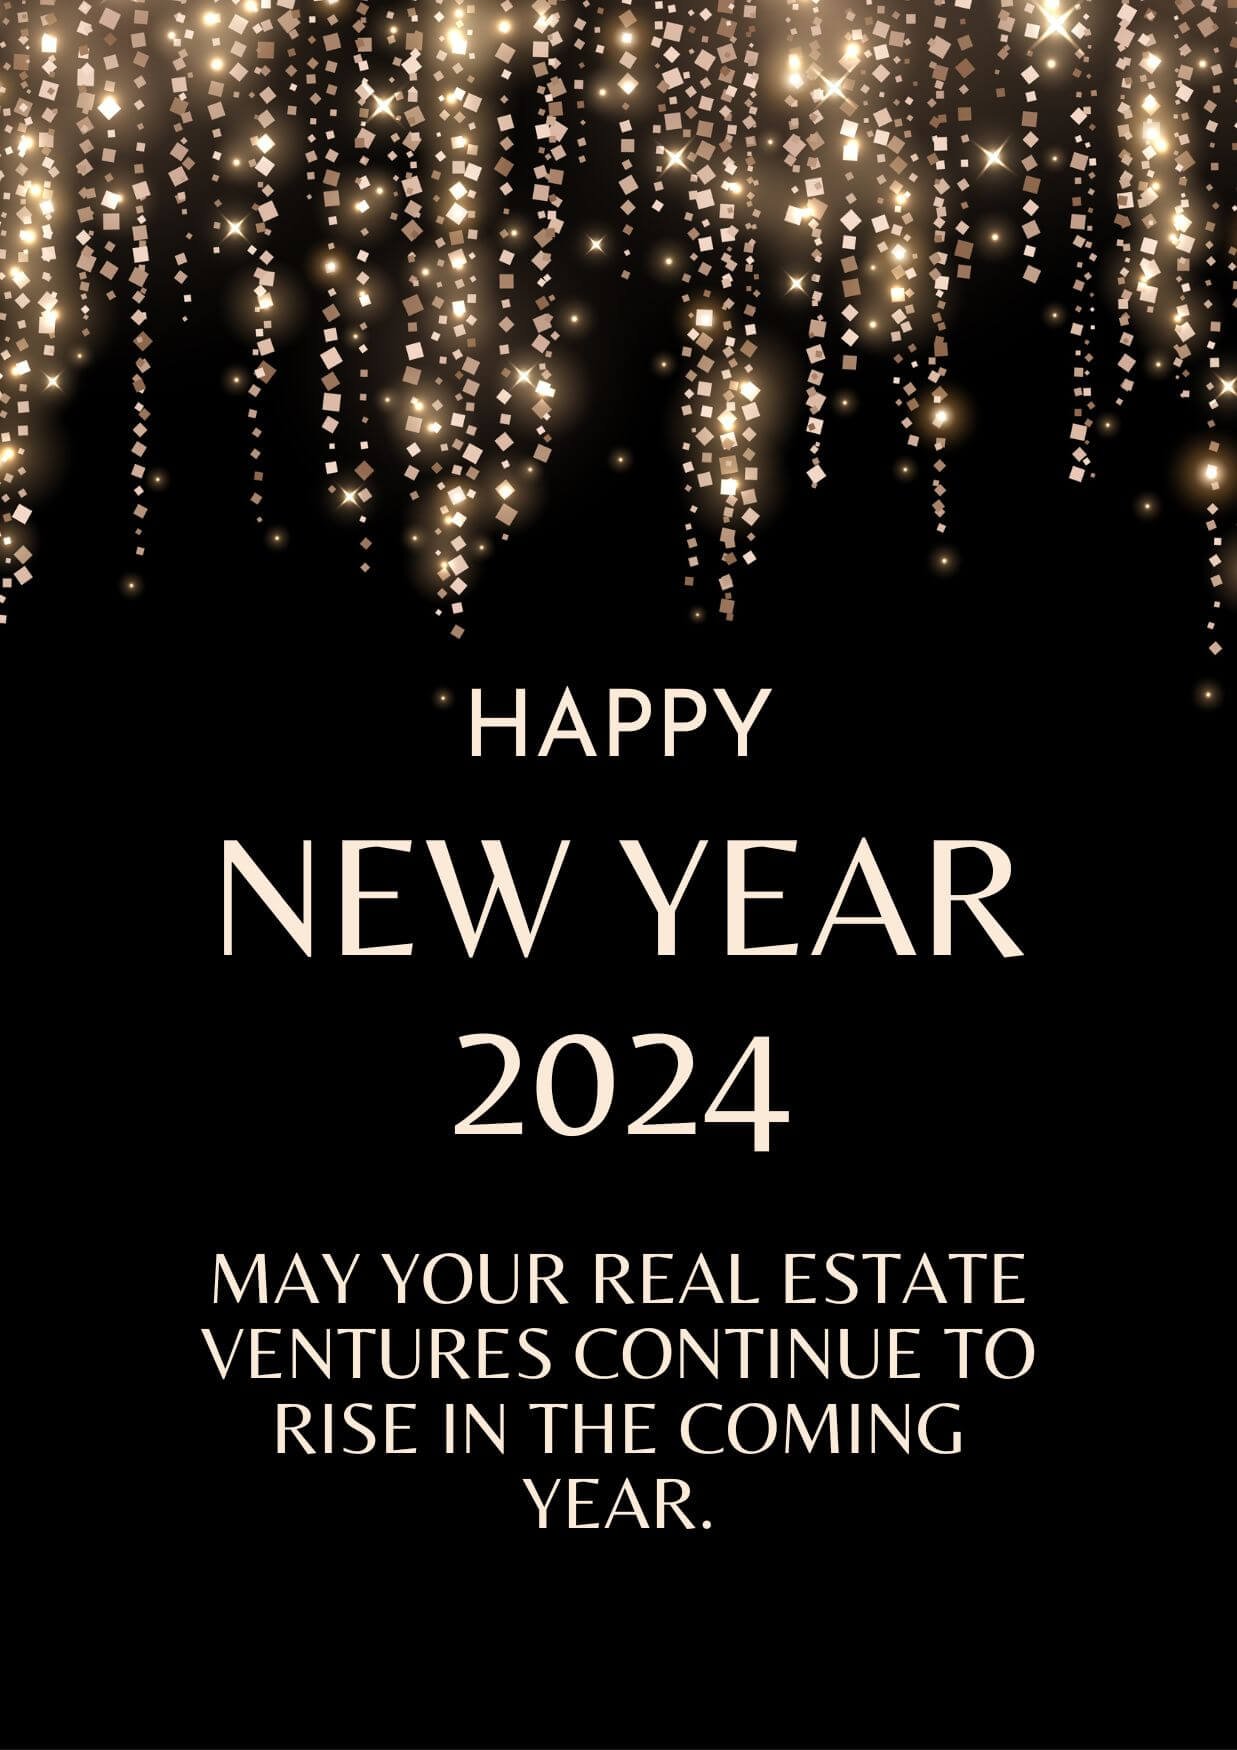 Happy New Year Quotes 2024 For Real Estate 